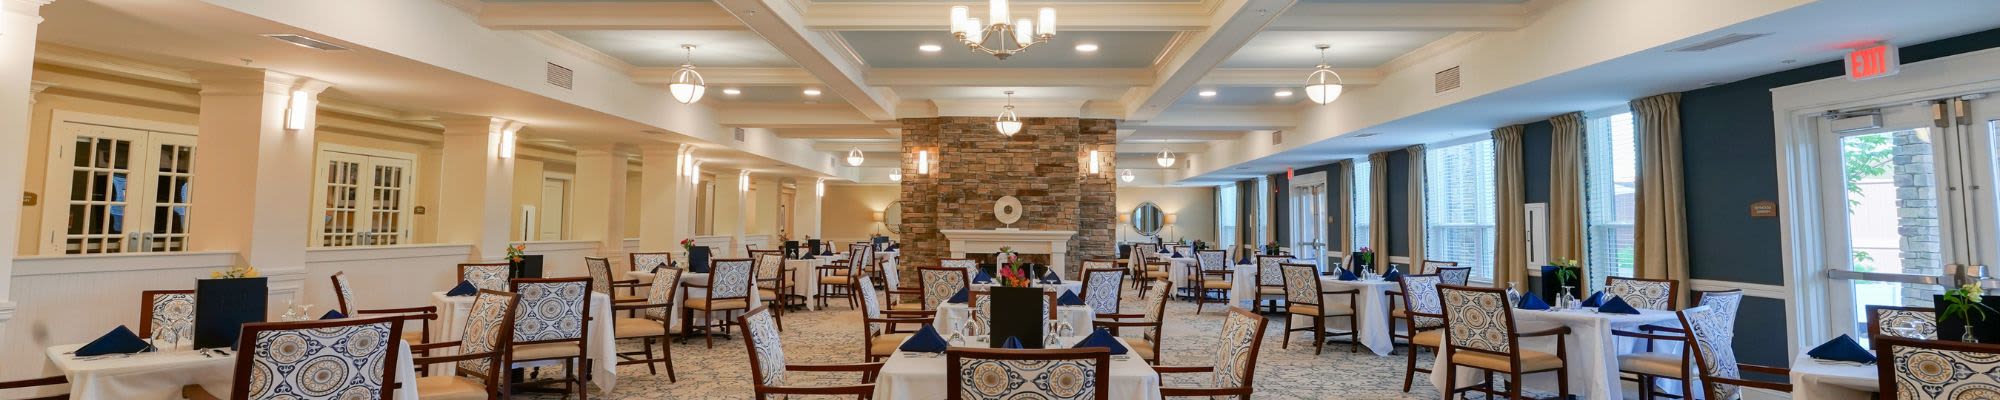 Dining at Harmony at Spring Hill in Lorton, Virginia